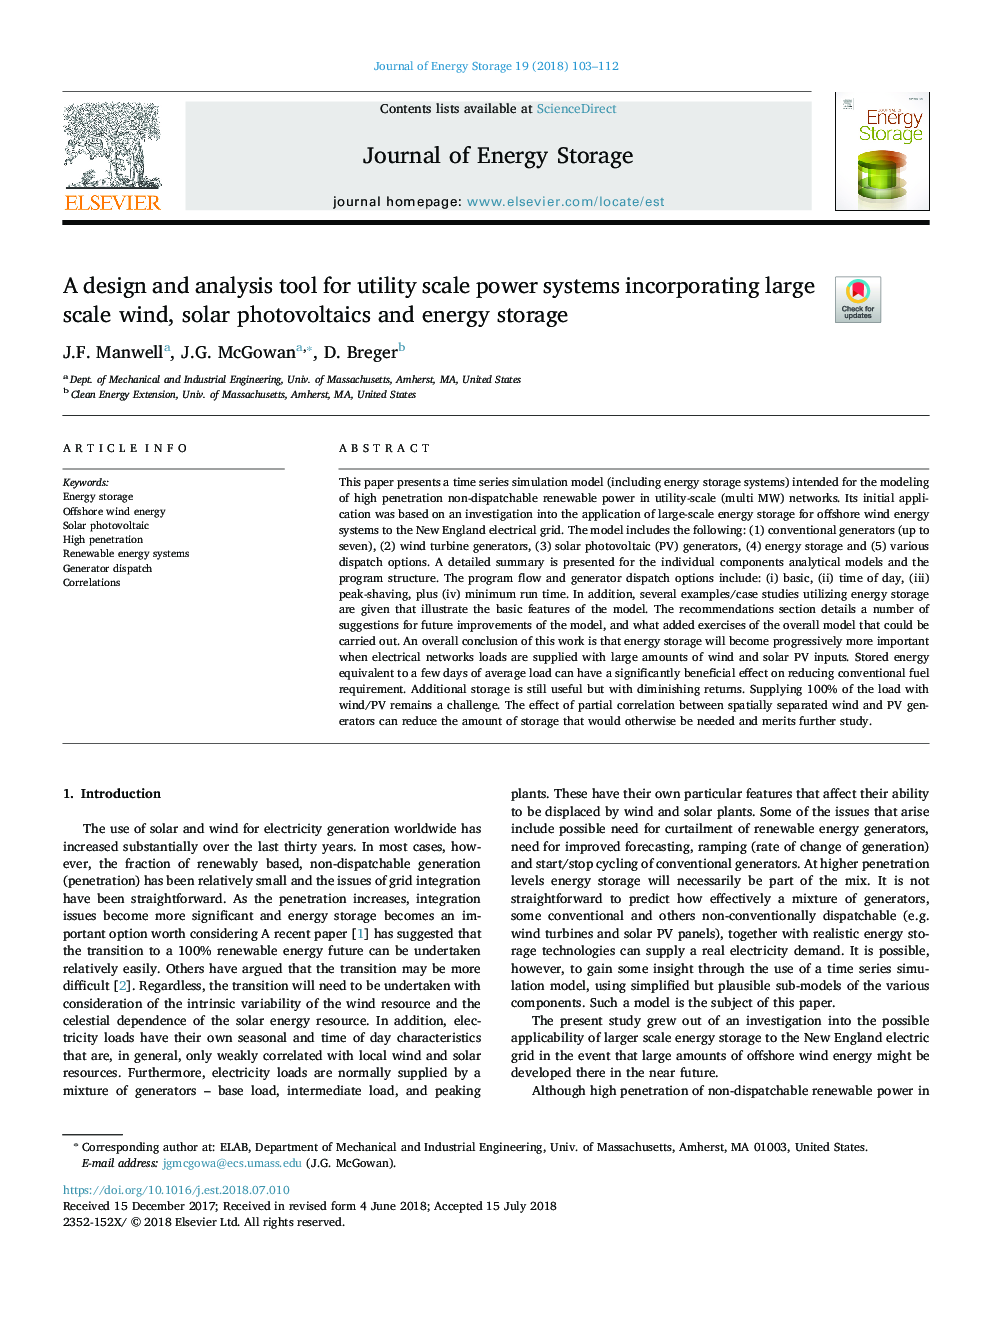 A design and analysis tool for utility scale power systems incorporating large scale wind, solar photovoltaics and energy storage